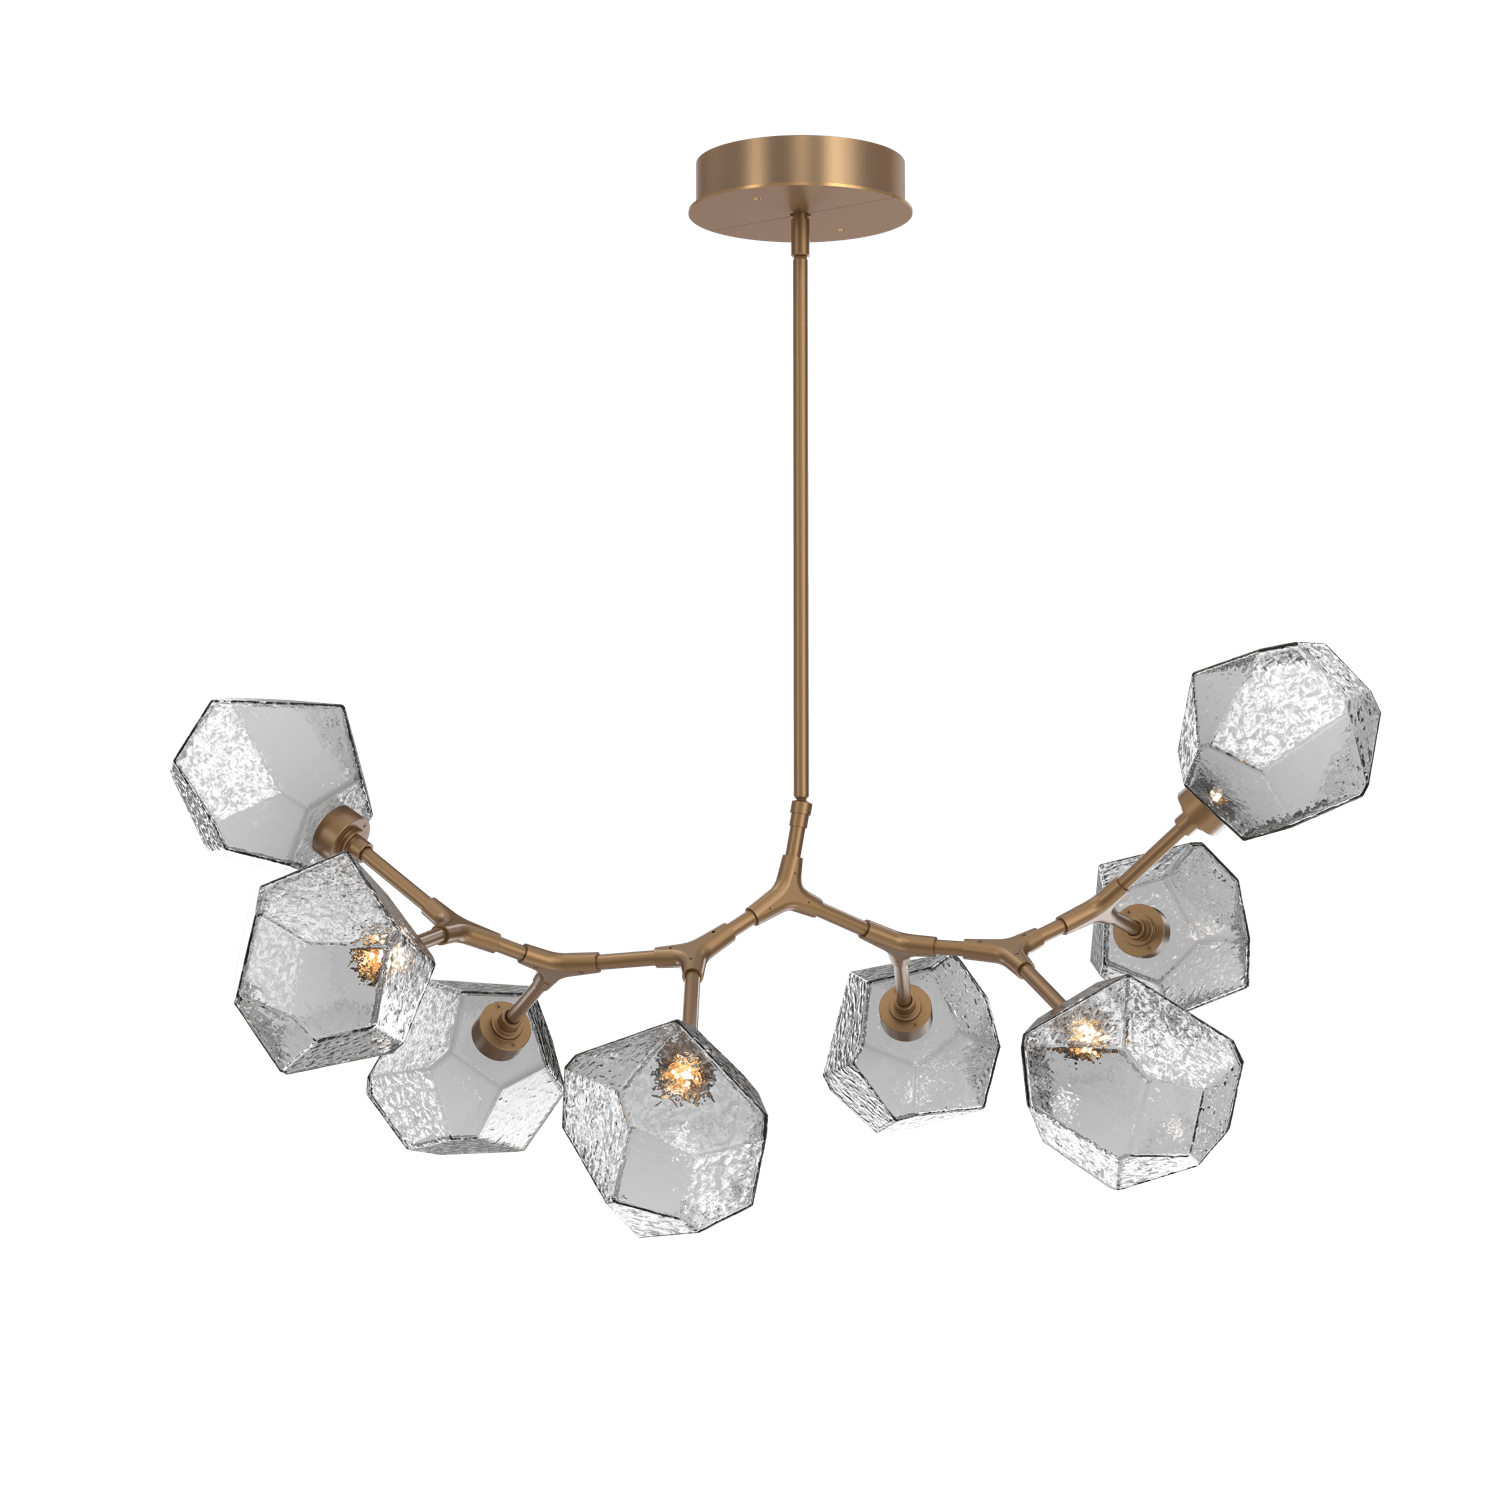 PLB0039-BB-NB-S-Hammerton-Studio-Gem-8-light-modern-branch-chandelier-with-novel-brass-finish-and-smoke-blown-glass-shades-and-LED-lamping